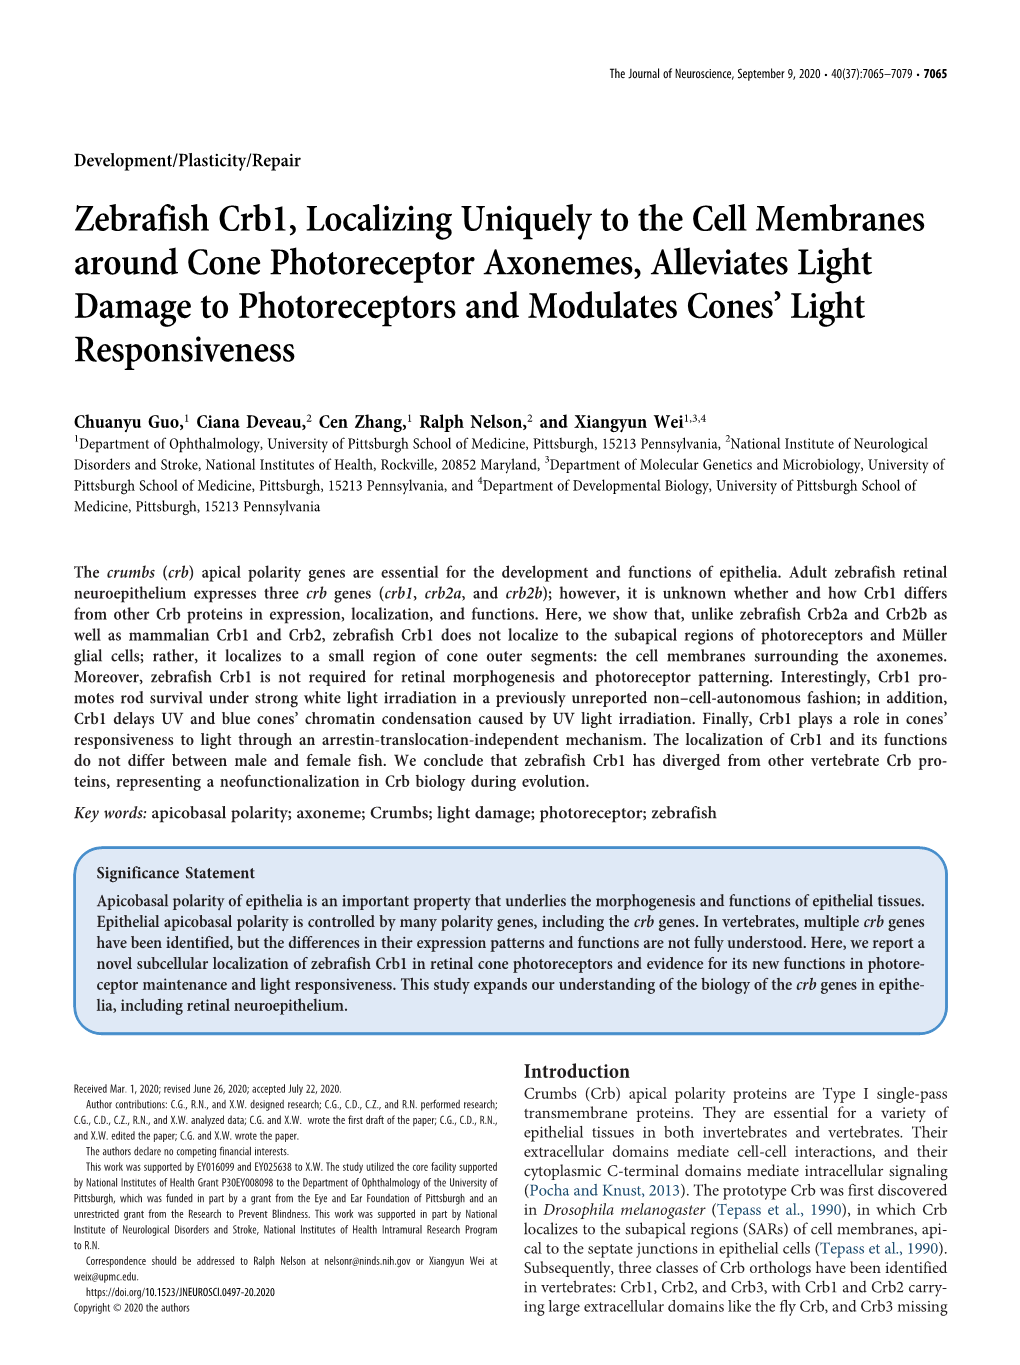 Zebrafish Crb1, Localizing Uniquely to the Cell Membranes Around Cone